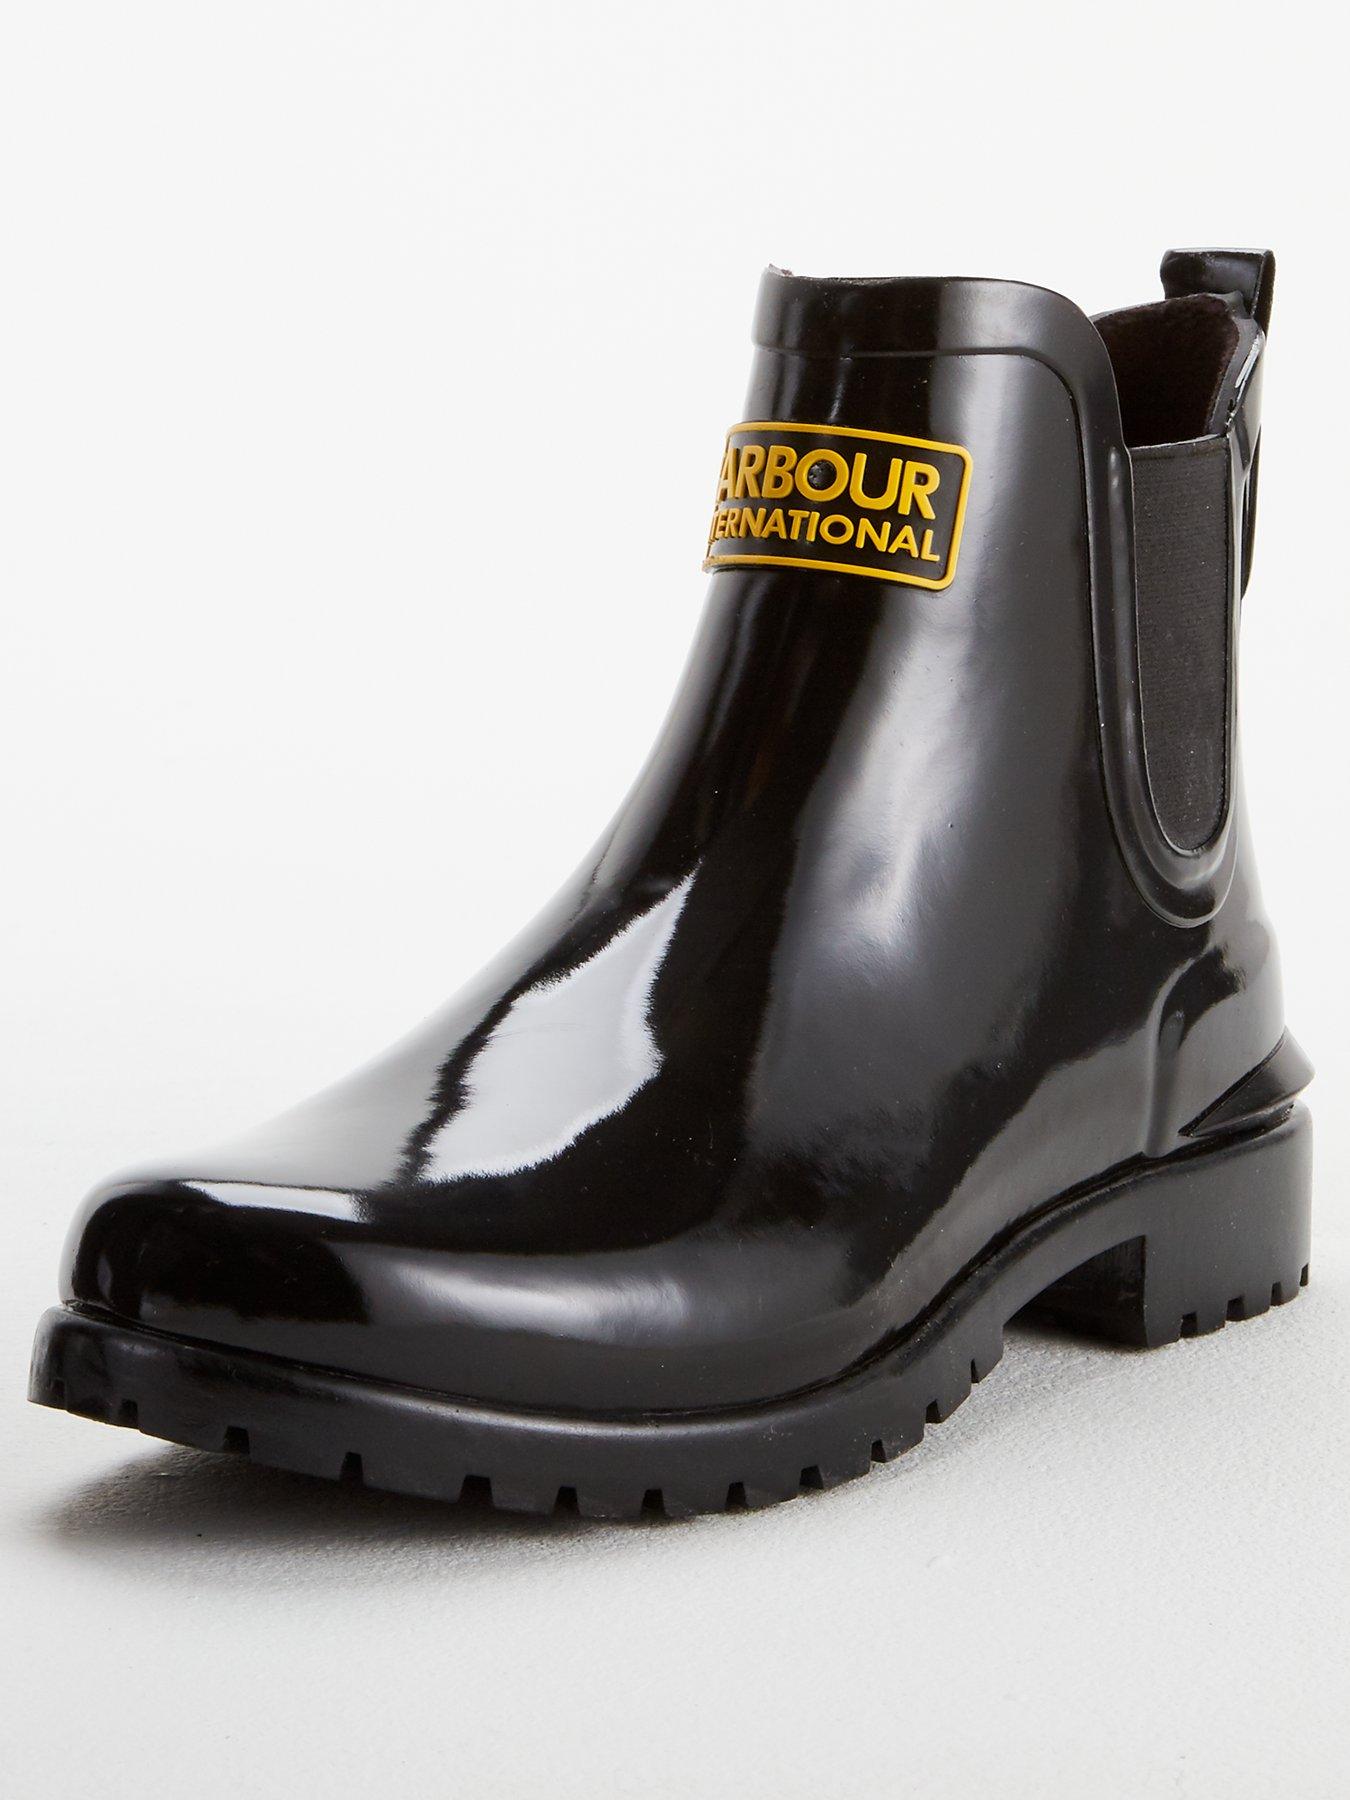 barbour penelope boots